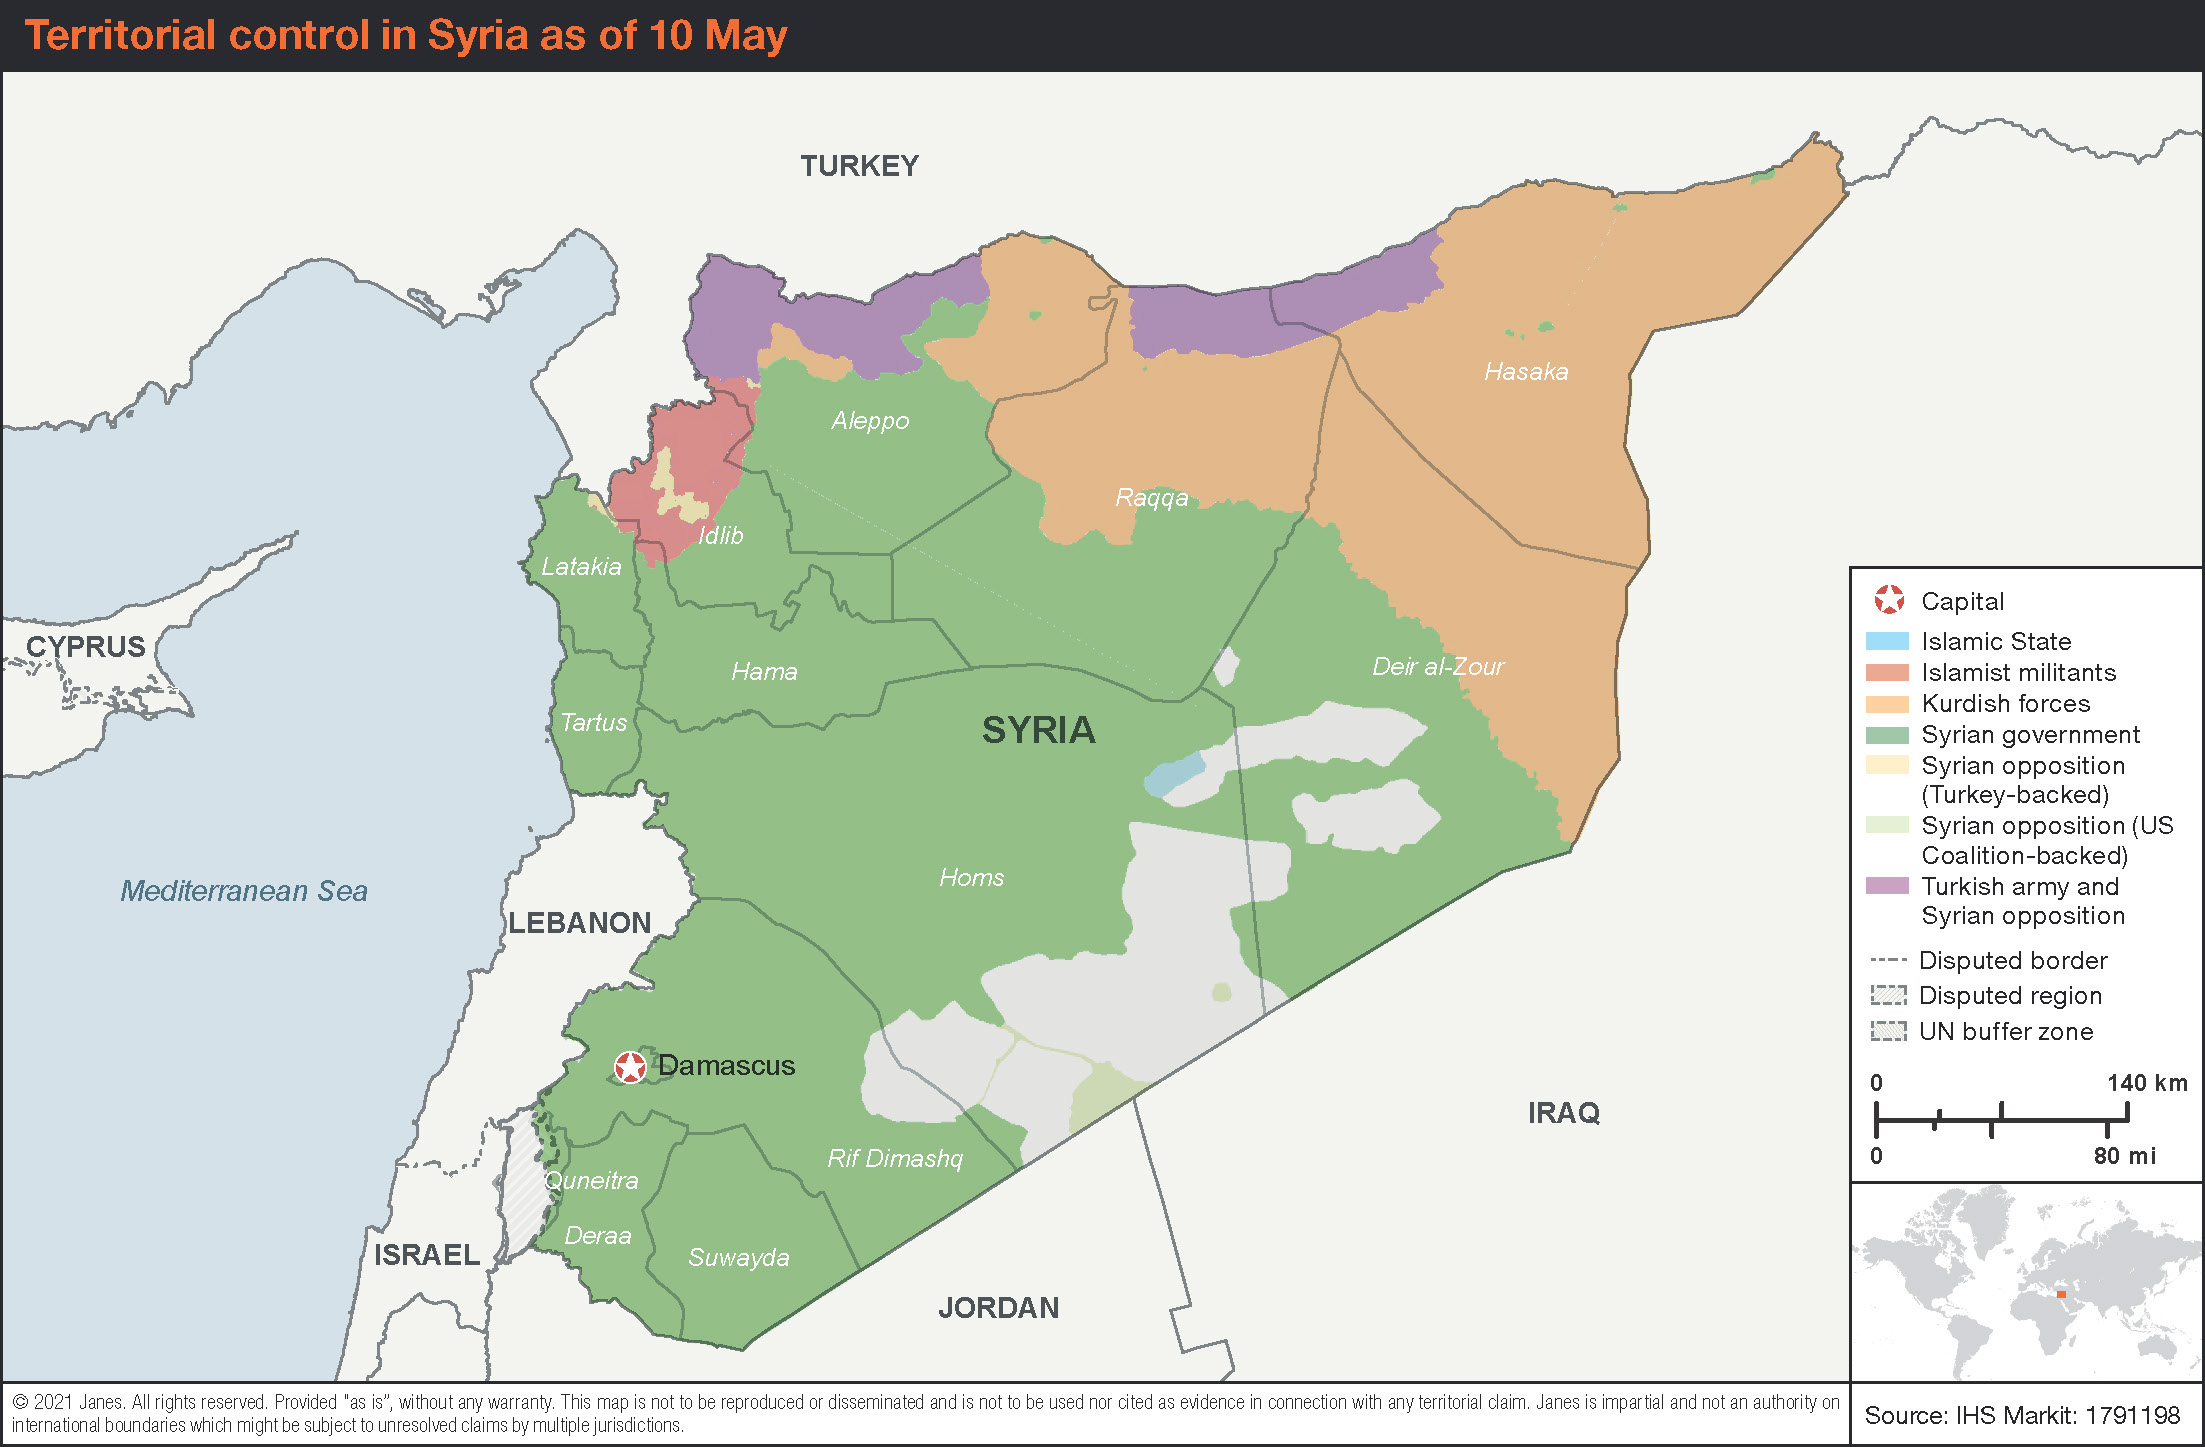 Territorial control in Syria as of 10 May (©2021 Janes)